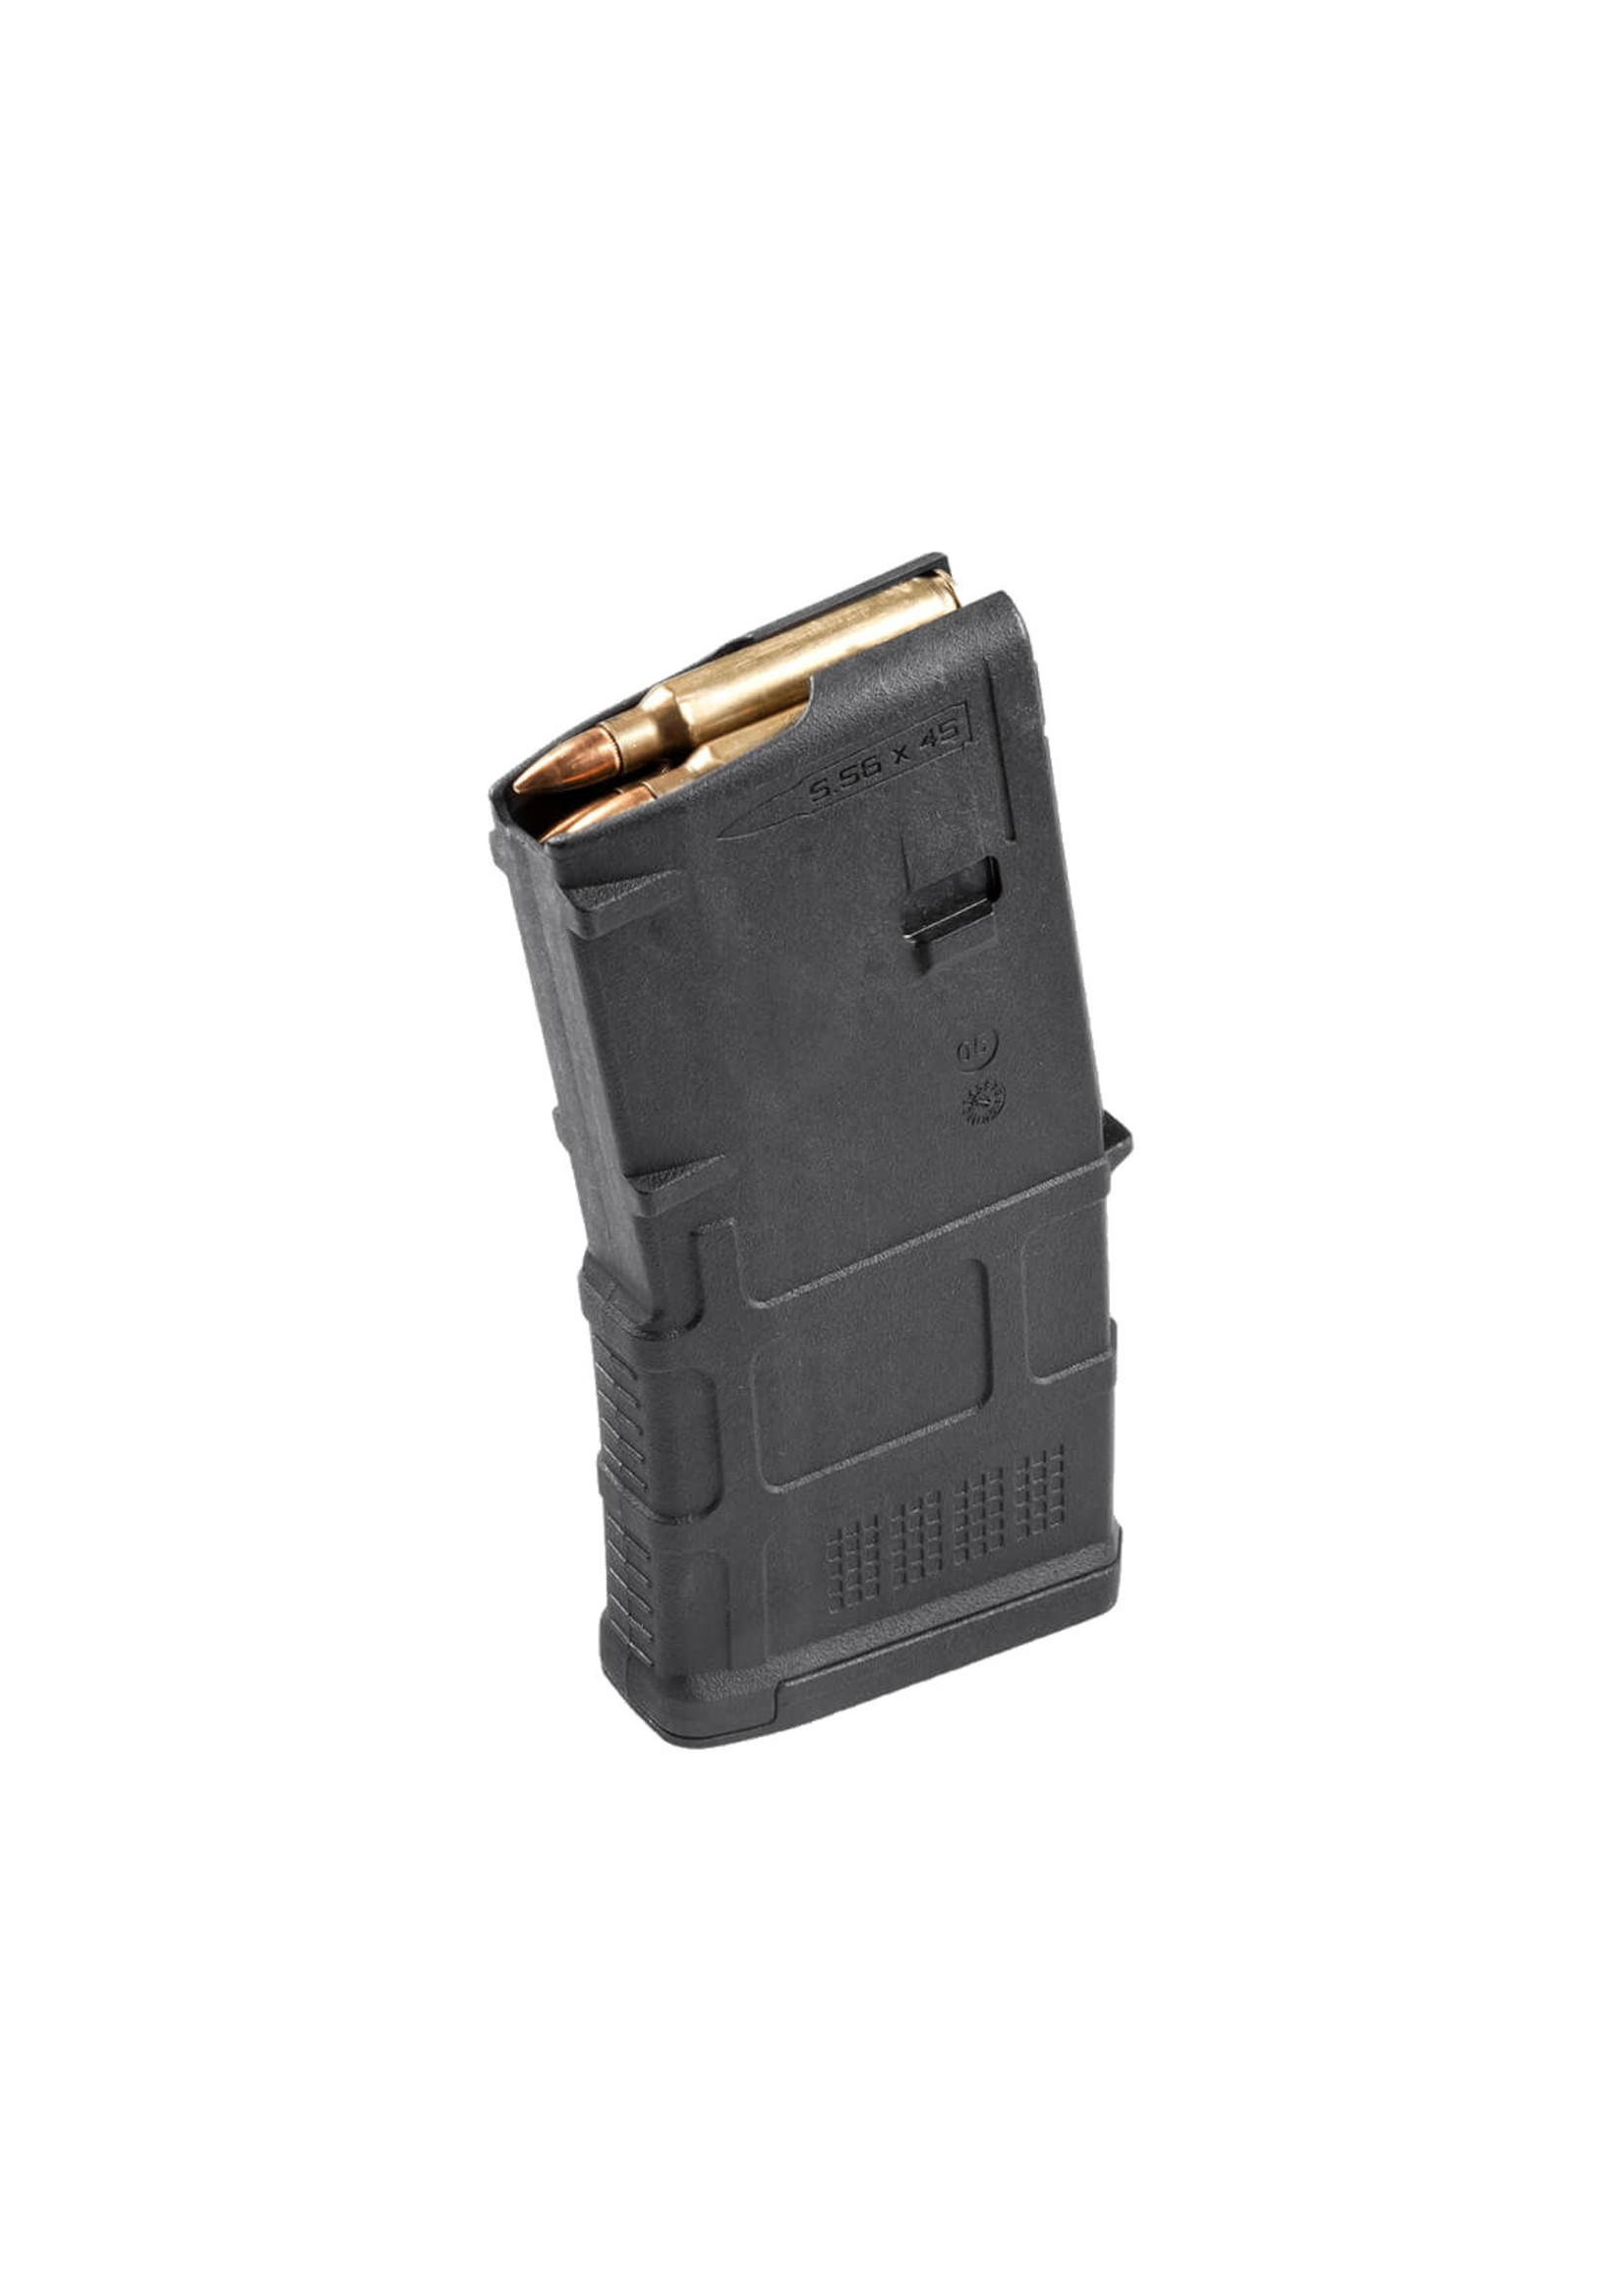 MAGPUL PMAG 20 AR/M4 GEN M3 PINNED TO 5